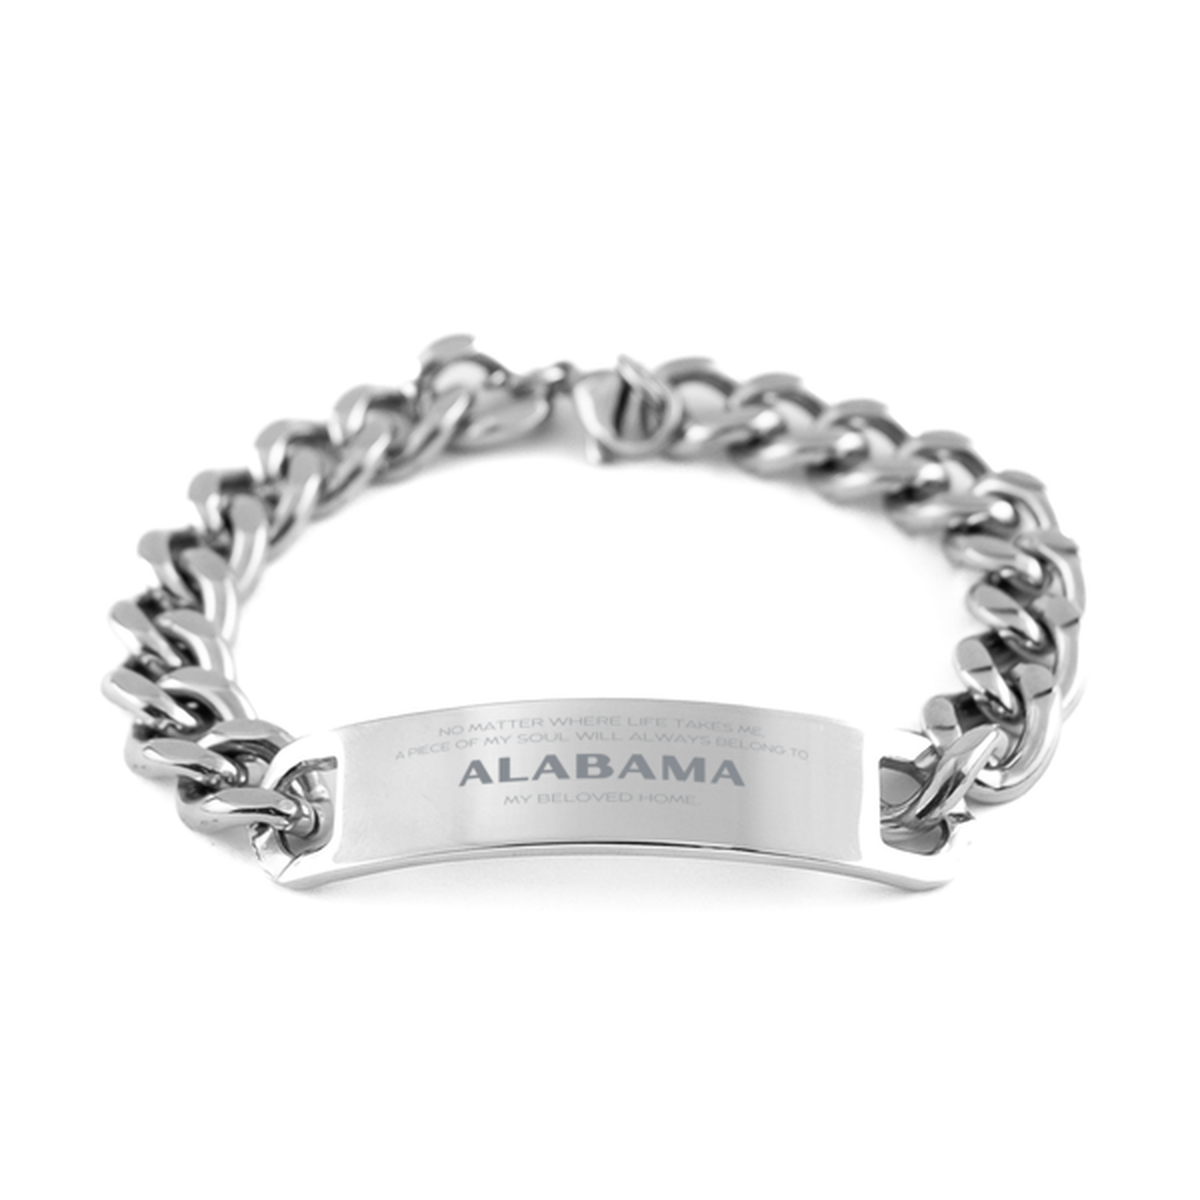 Love Alabama State Gifts, My soul will always belong to Alabama, Proud Cuban Chain Stainless Steel Bracelet, Birthday Unique Gifts For Alabama Men, Women, Friends